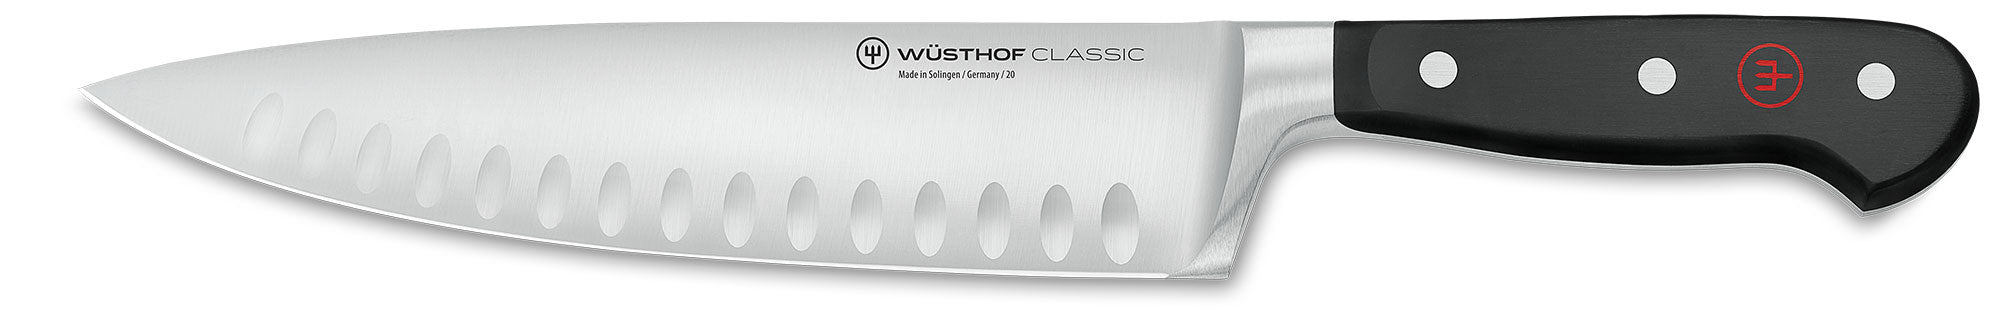 Did I make a mistake buying Wusthof? : r/chefknives